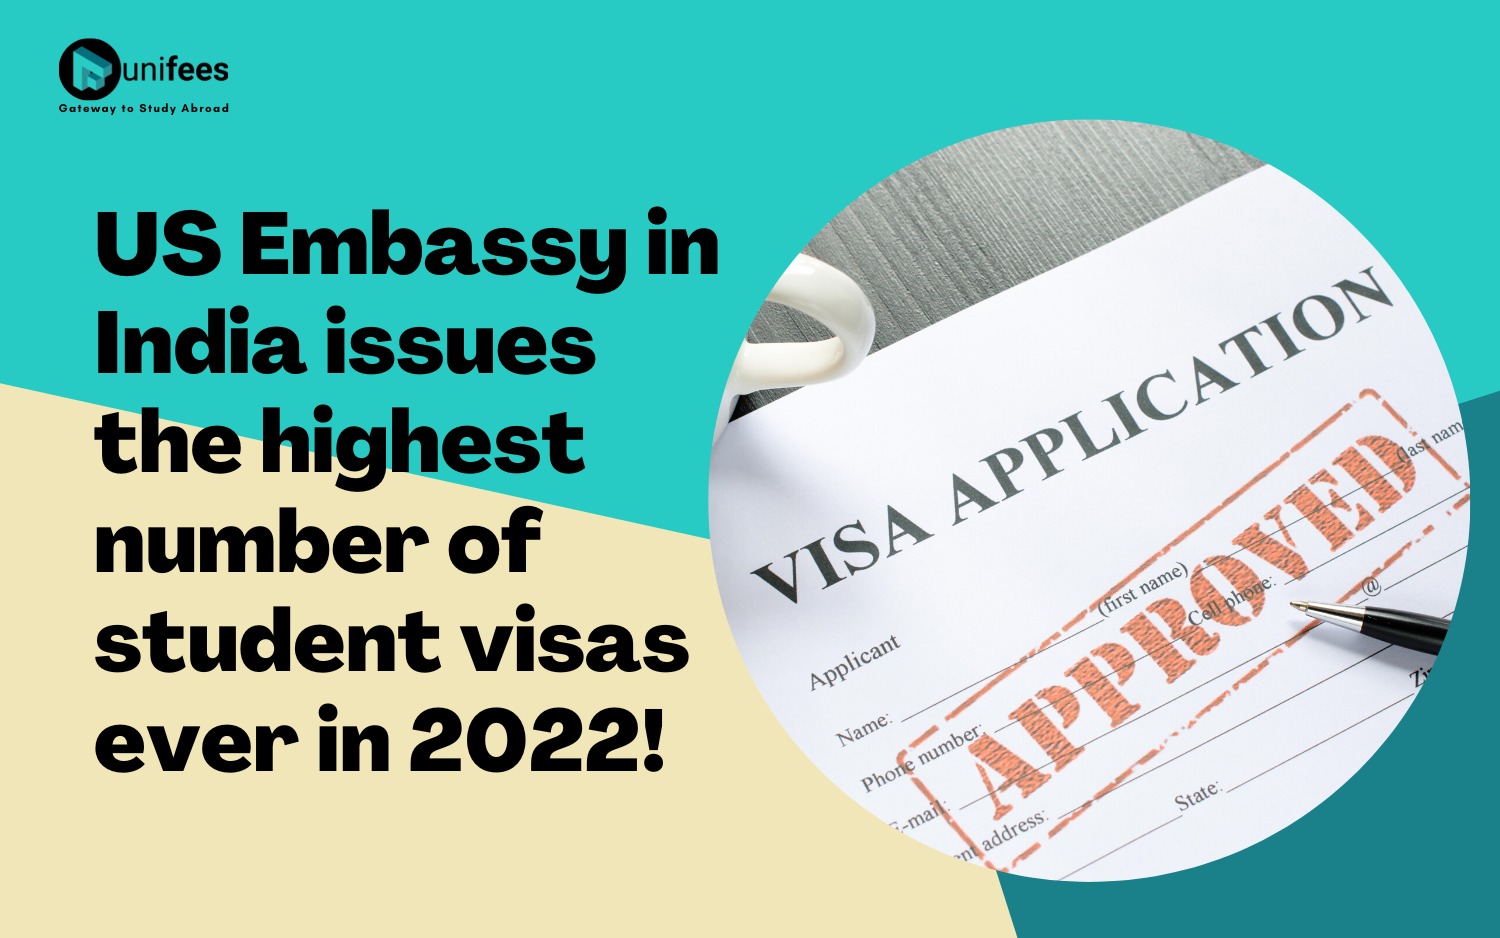 US Embassy in India issues the highest number of student visas ever in 2022!